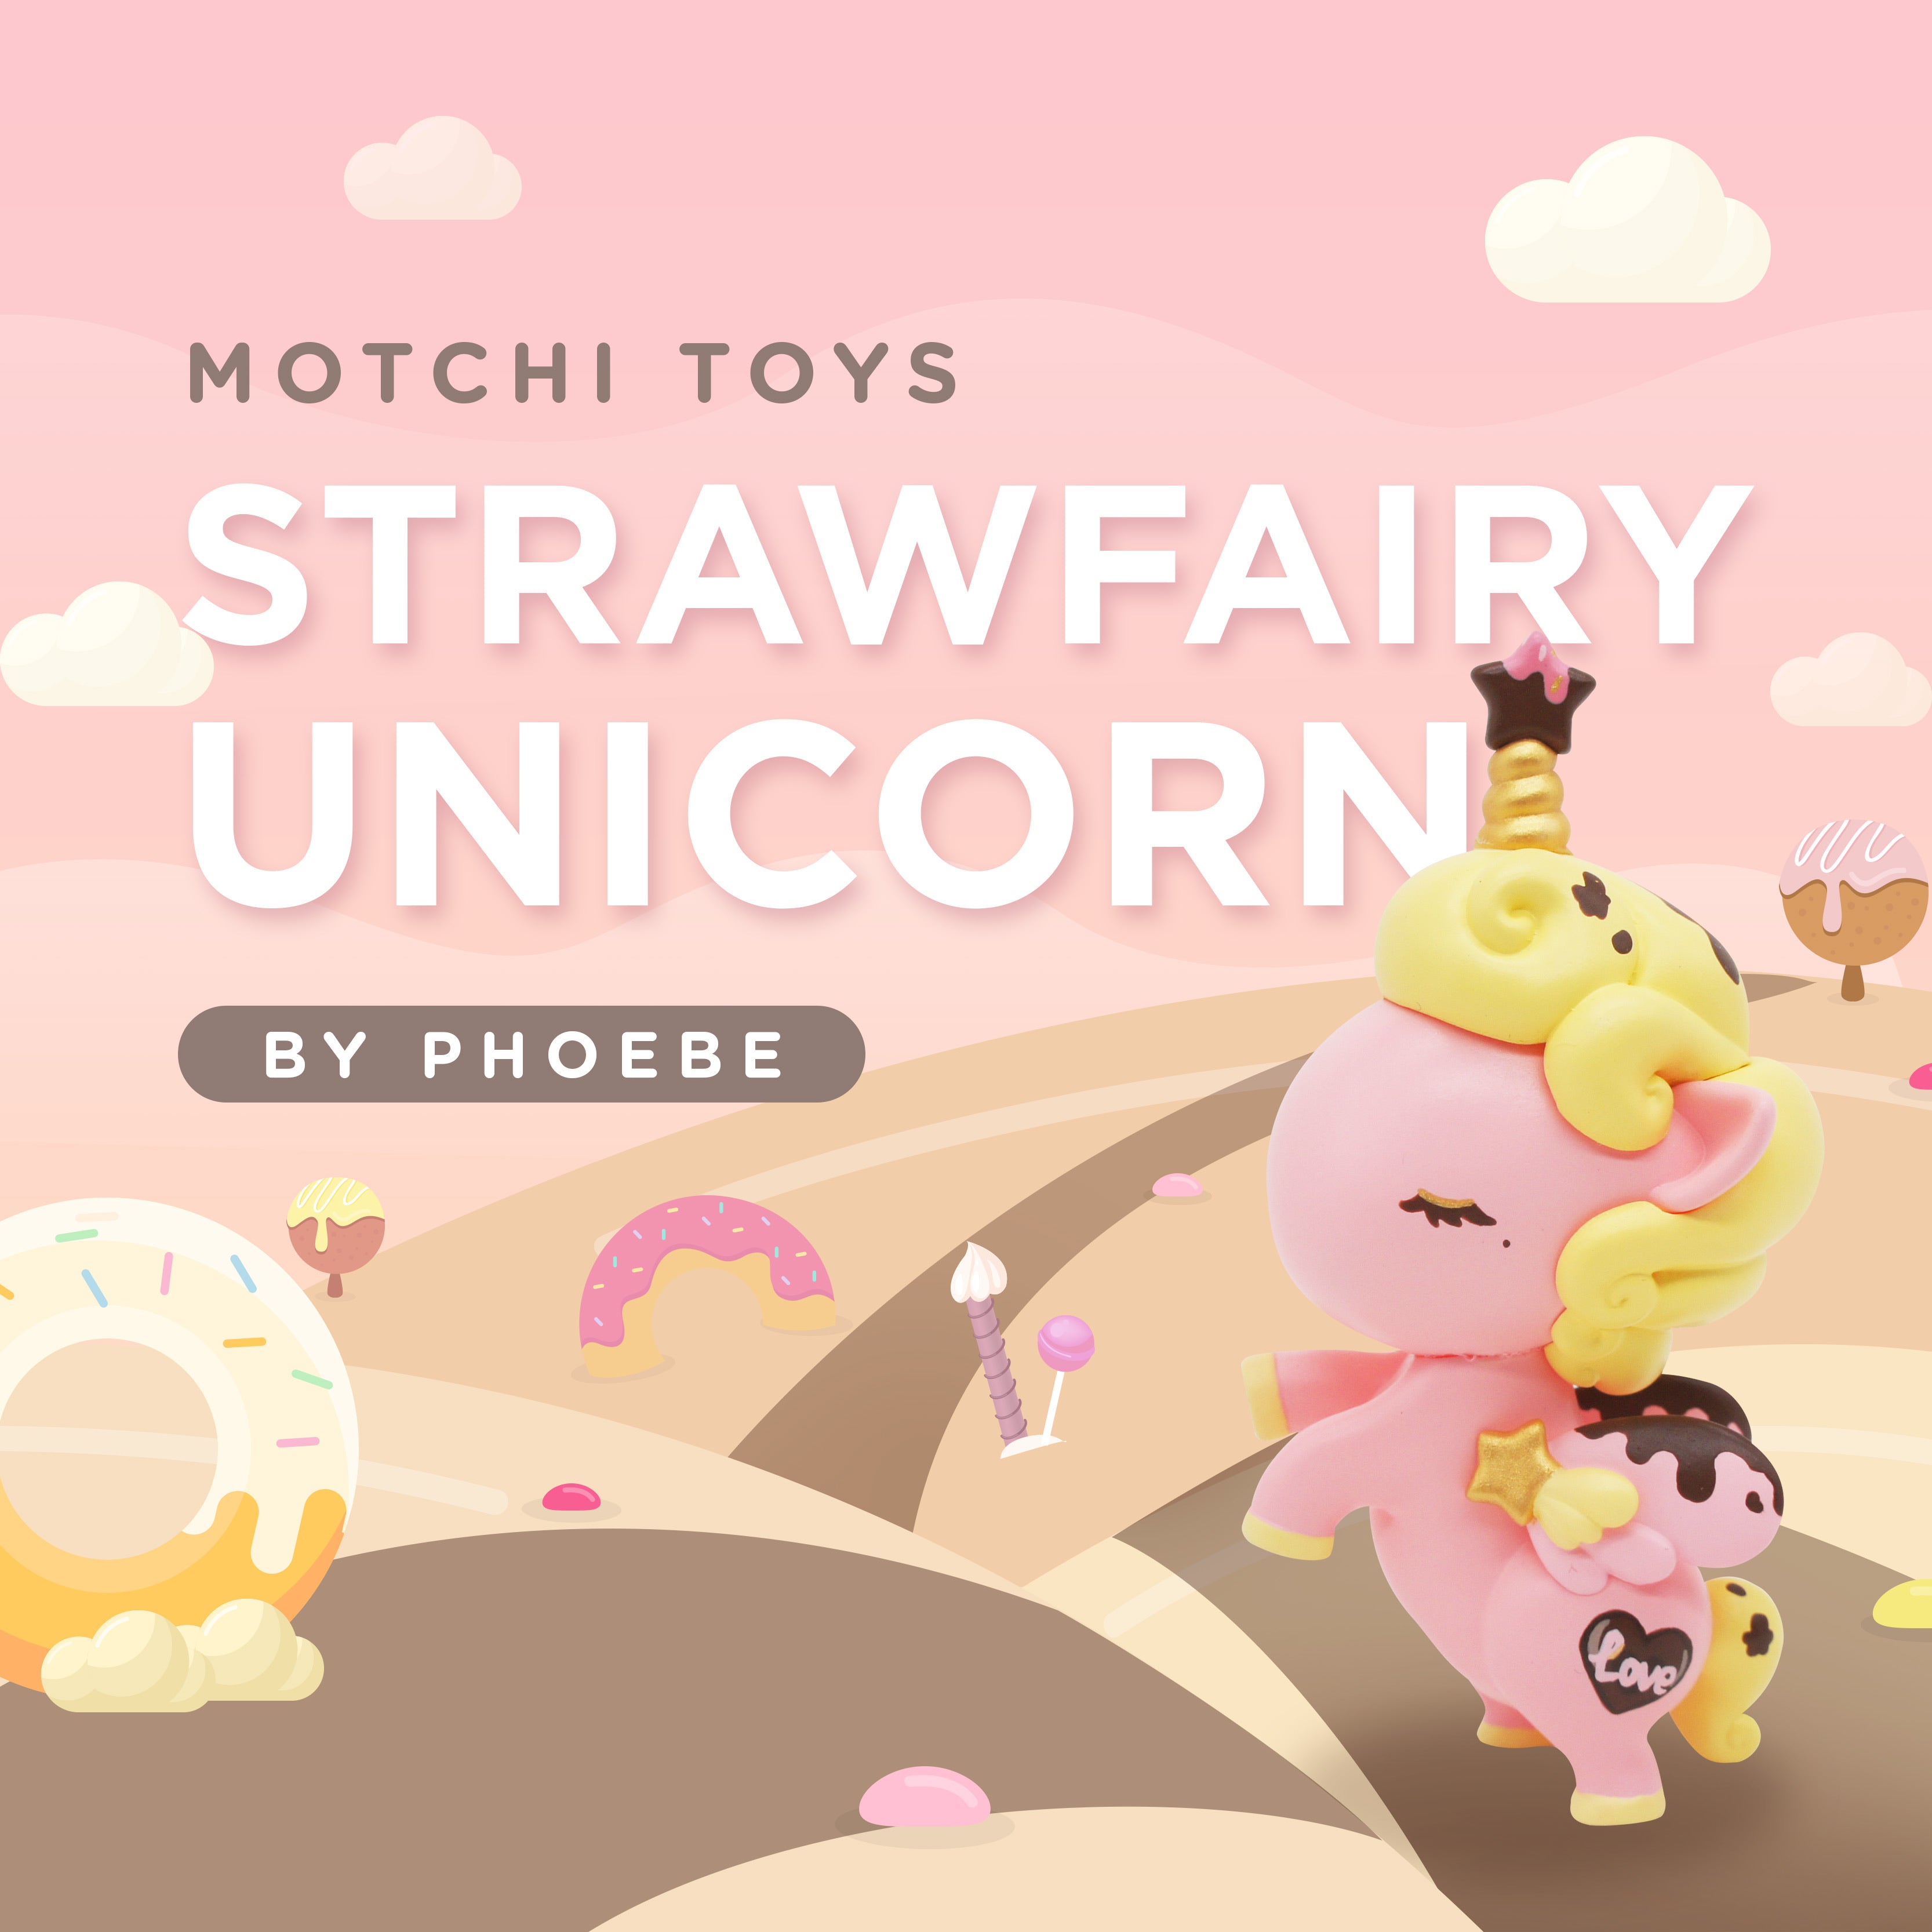 A hand-painted resin toy unicorn with a star on its horn, part of the Motchi Unicorn Starwfairy collection by Phoebe.